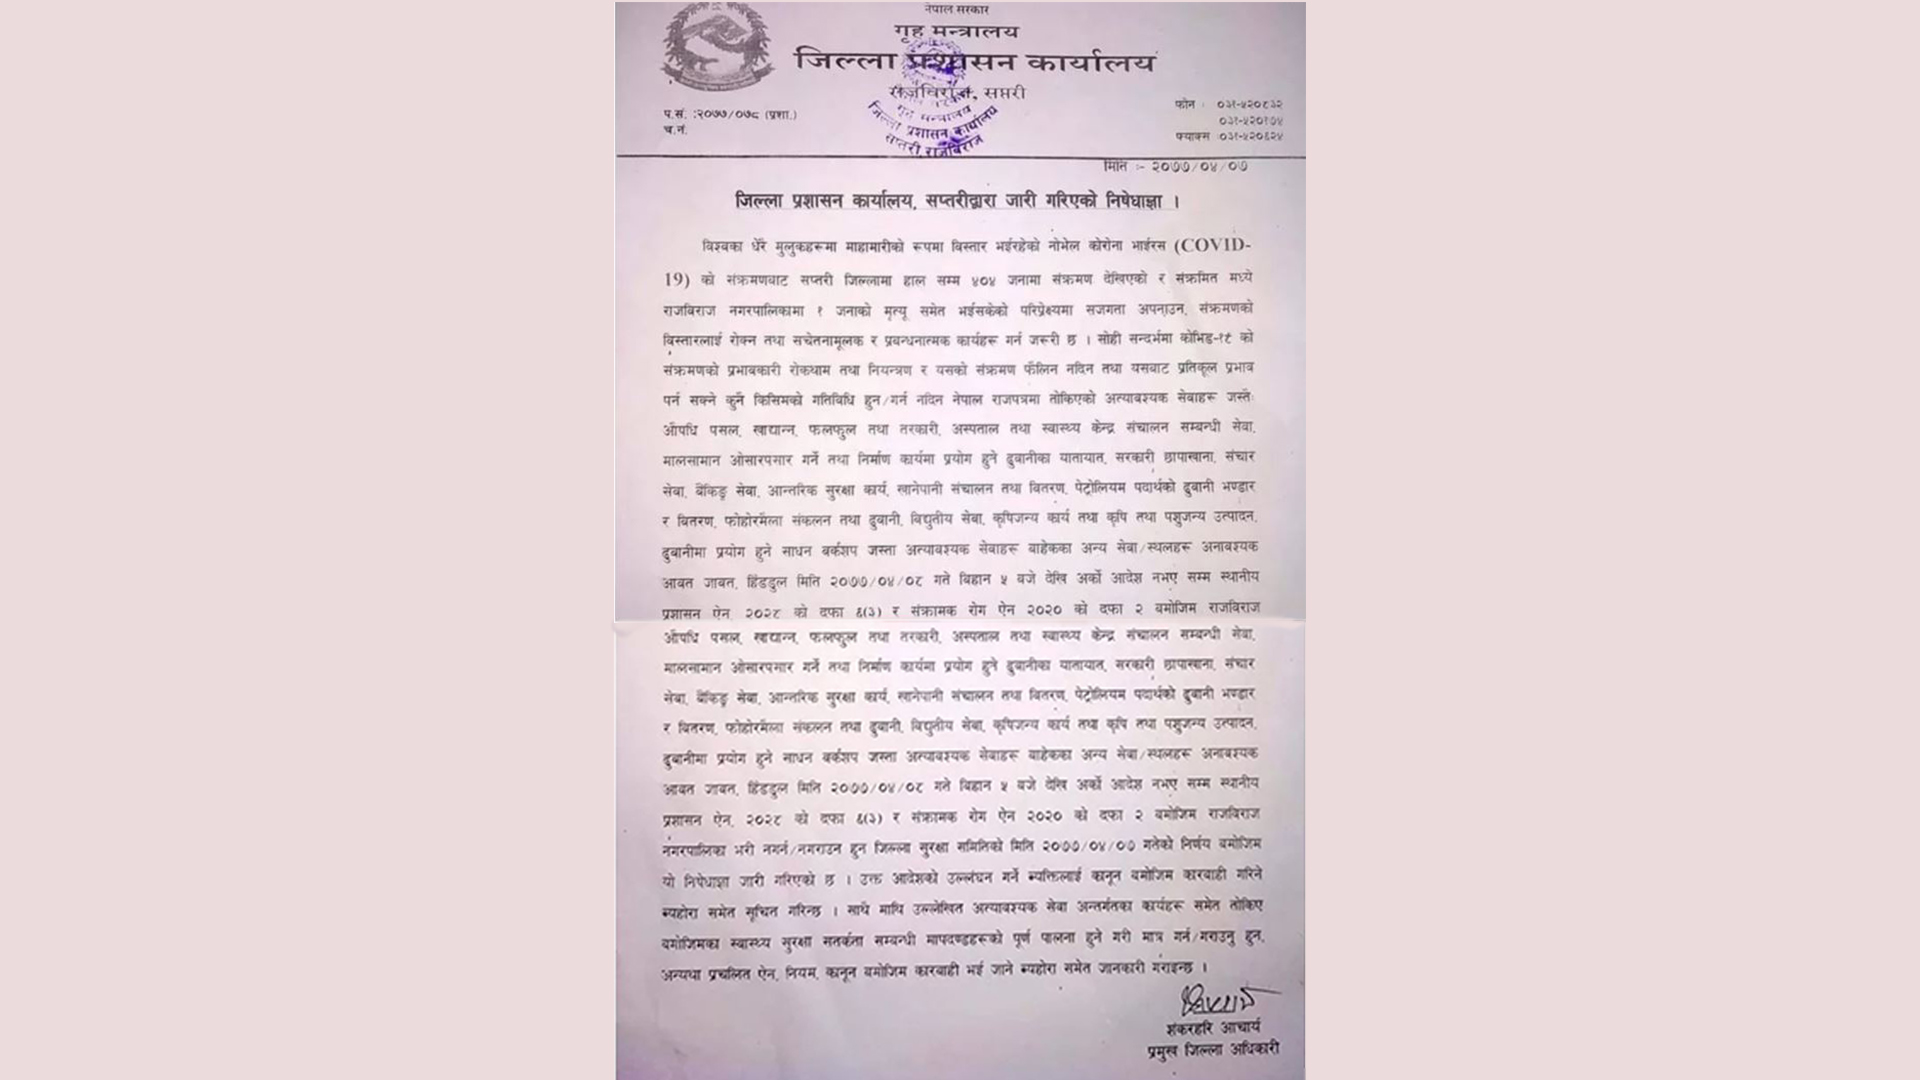 An indefinite restriction order has been issued in Rajbiraj